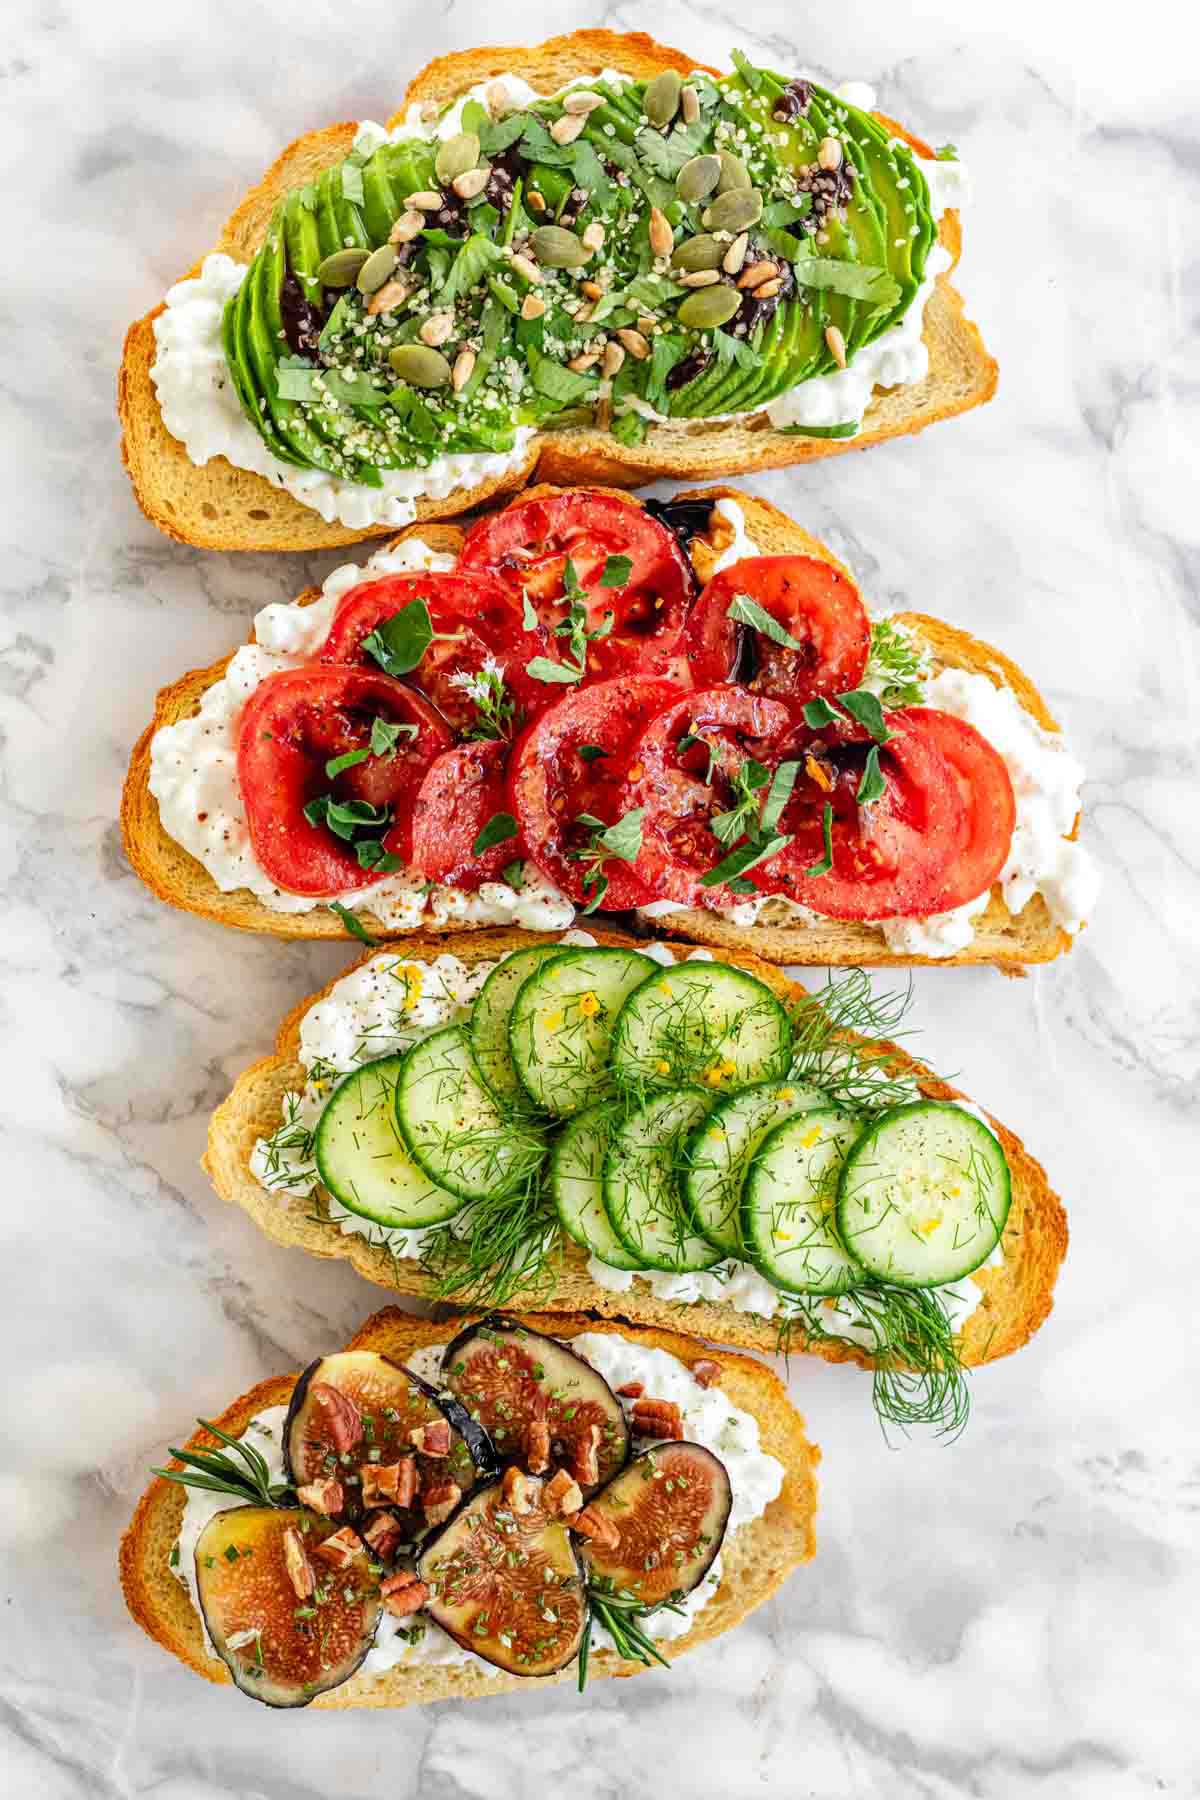 4 slices of cottage cheese toast with different toppings like avocado, cucumber, tomato, and figs.